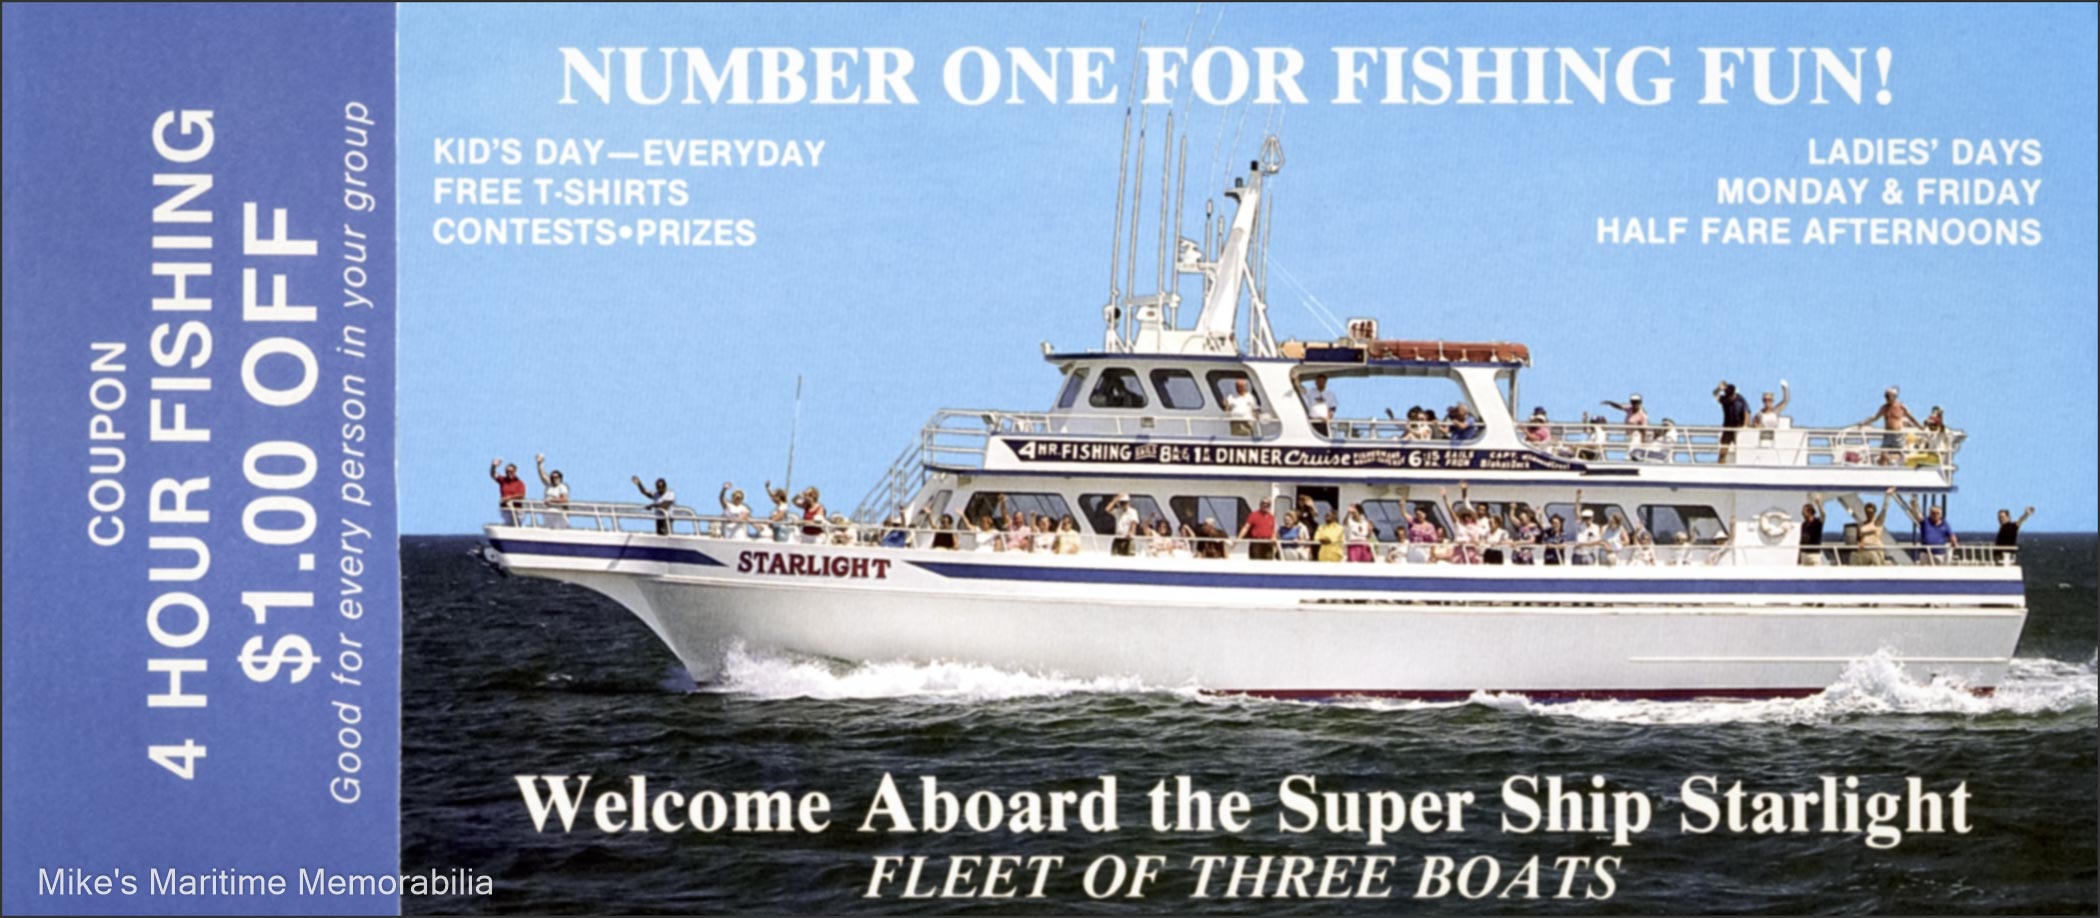 STARLIGHT Rack Card, Cape May, NJ – 1990 A 1990 advertising rack card for the "STARLIGHT". The "STARLIGHT" was built in 1984 for Captain Jim Cicchitti by Gulf Craft at Patterson, LA. She later sailed as the "ELEANOR R" from Cleveland, OH before returning to New Jersey as the "WHALE WATCHER II" from Cape May, NJ. She then sailed as the "NORTH STAR EXPRESS" from Panama City, FL and is presently sailing as the "CAPT. ANDERSON IV" from Panama City, FL.